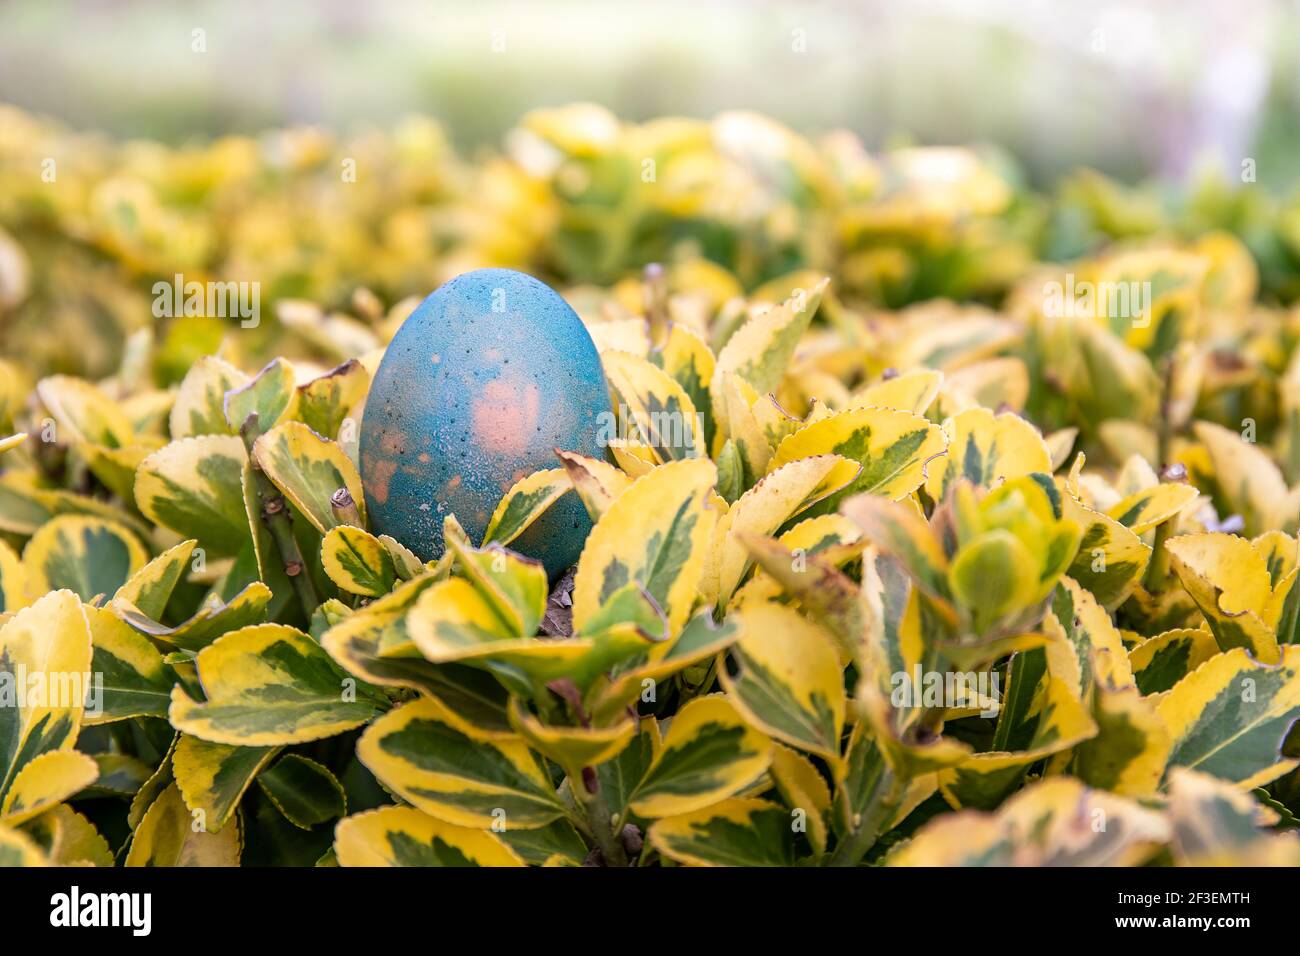 Ready for an Easter eggs hunt? A light blue egg lays on the top of a green and yellow bush, waiting for a child to find it. Stock Photo